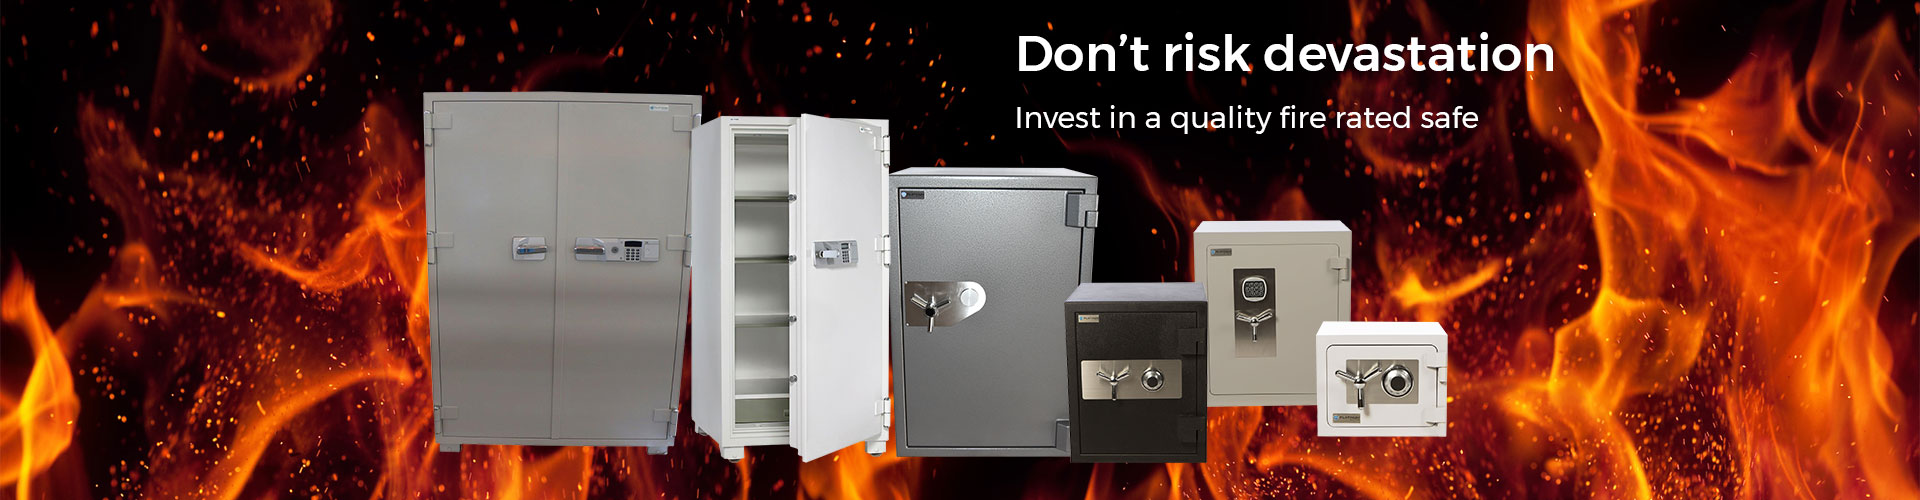 Don't risk devastation. Invest in a quality fire rated safe.